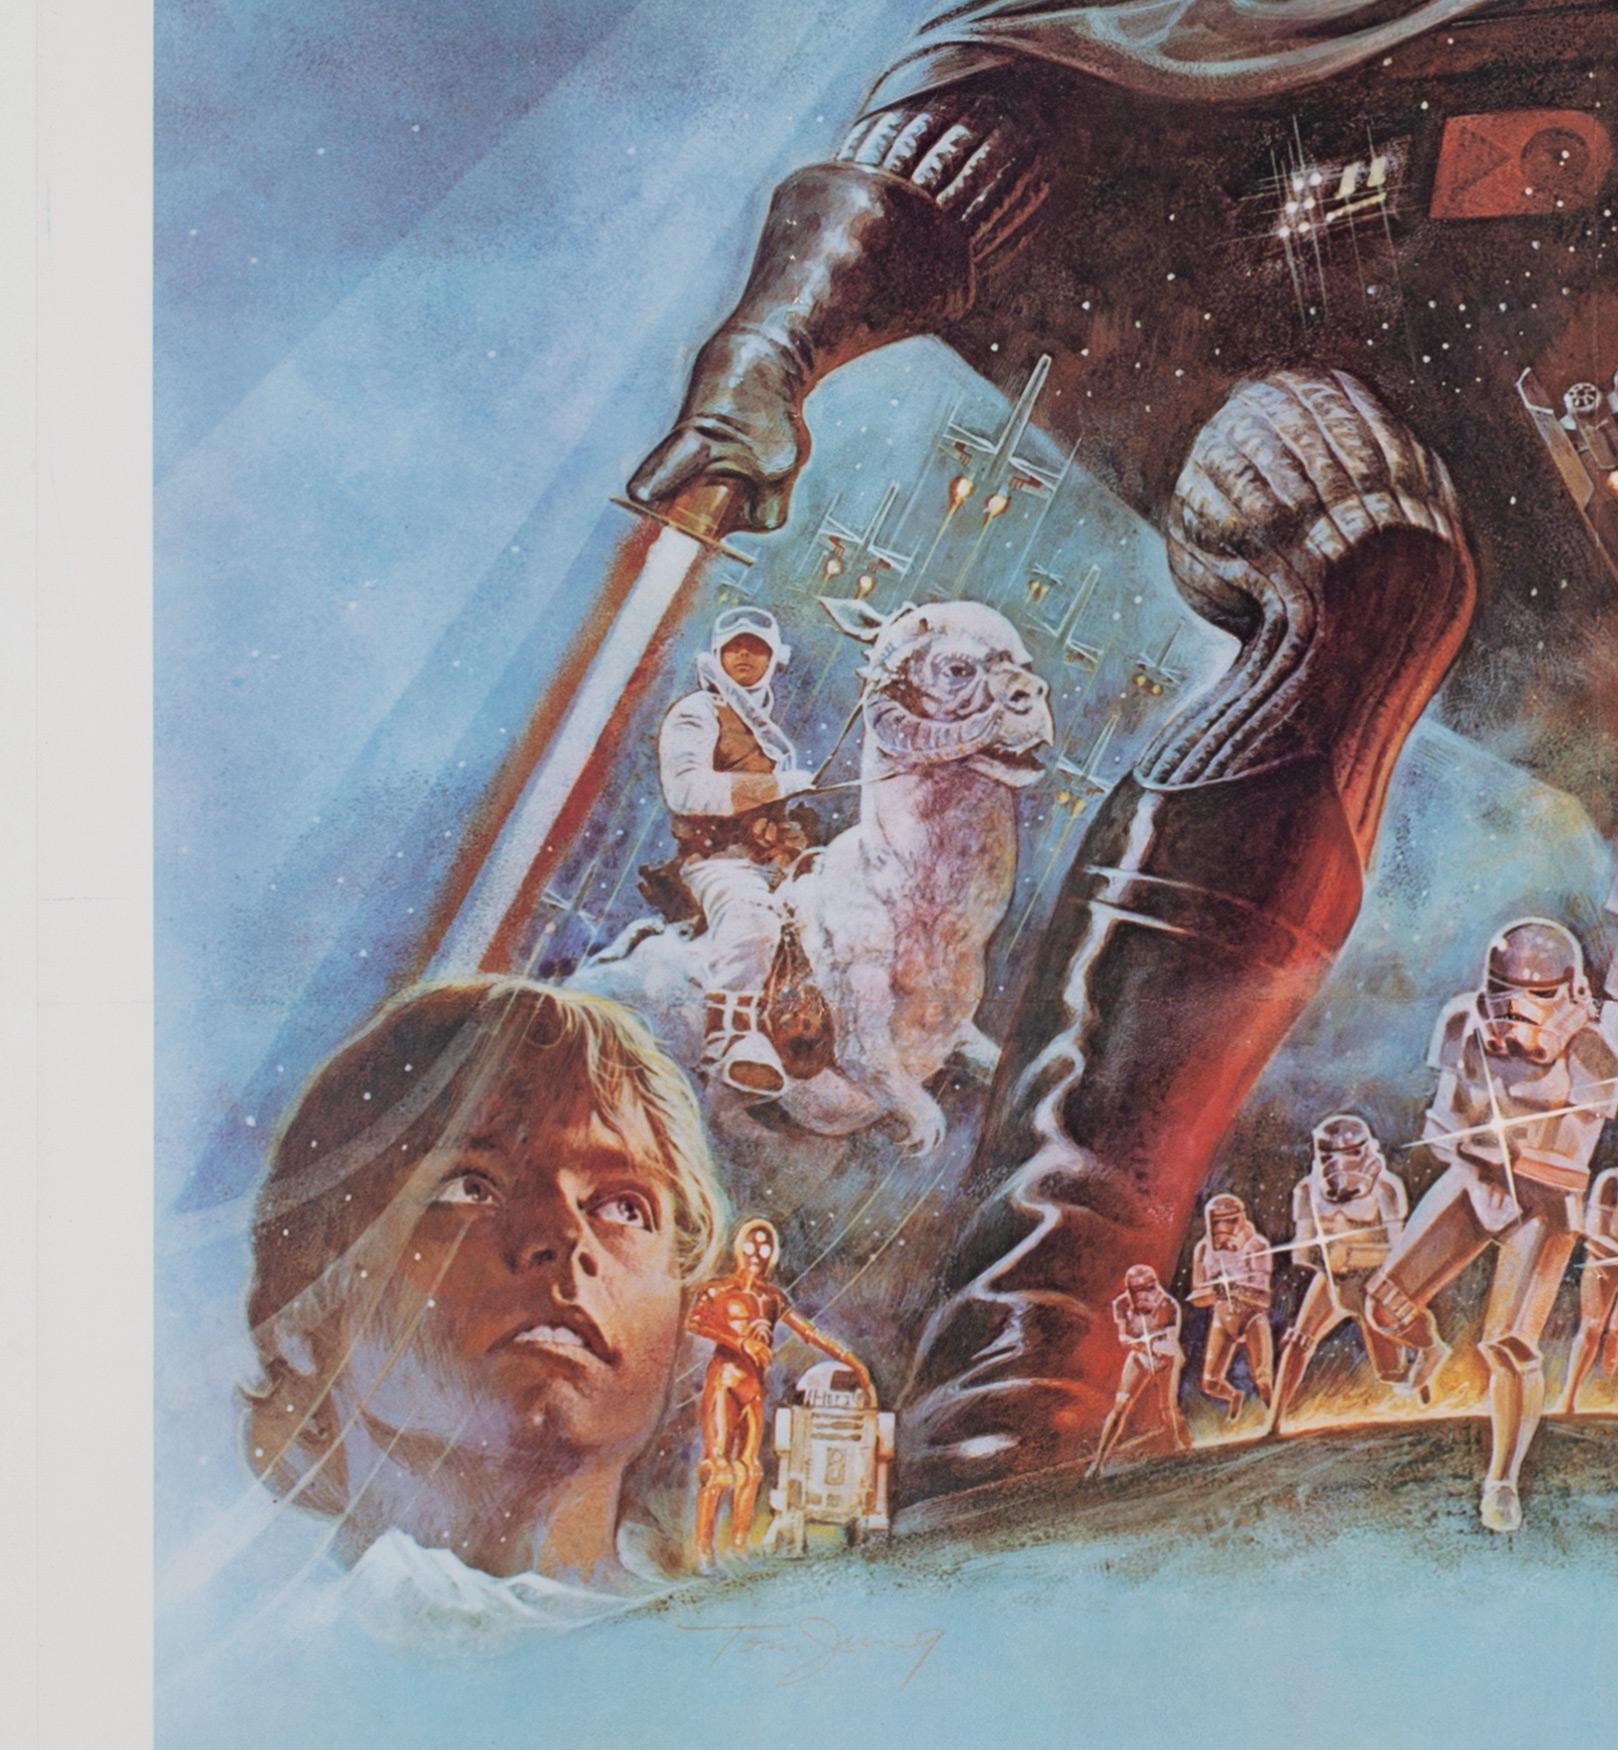 20th Century The Empire Strikes Back 1980 US 1 Sheet Style B Film Poster, Jung, Linen Backed